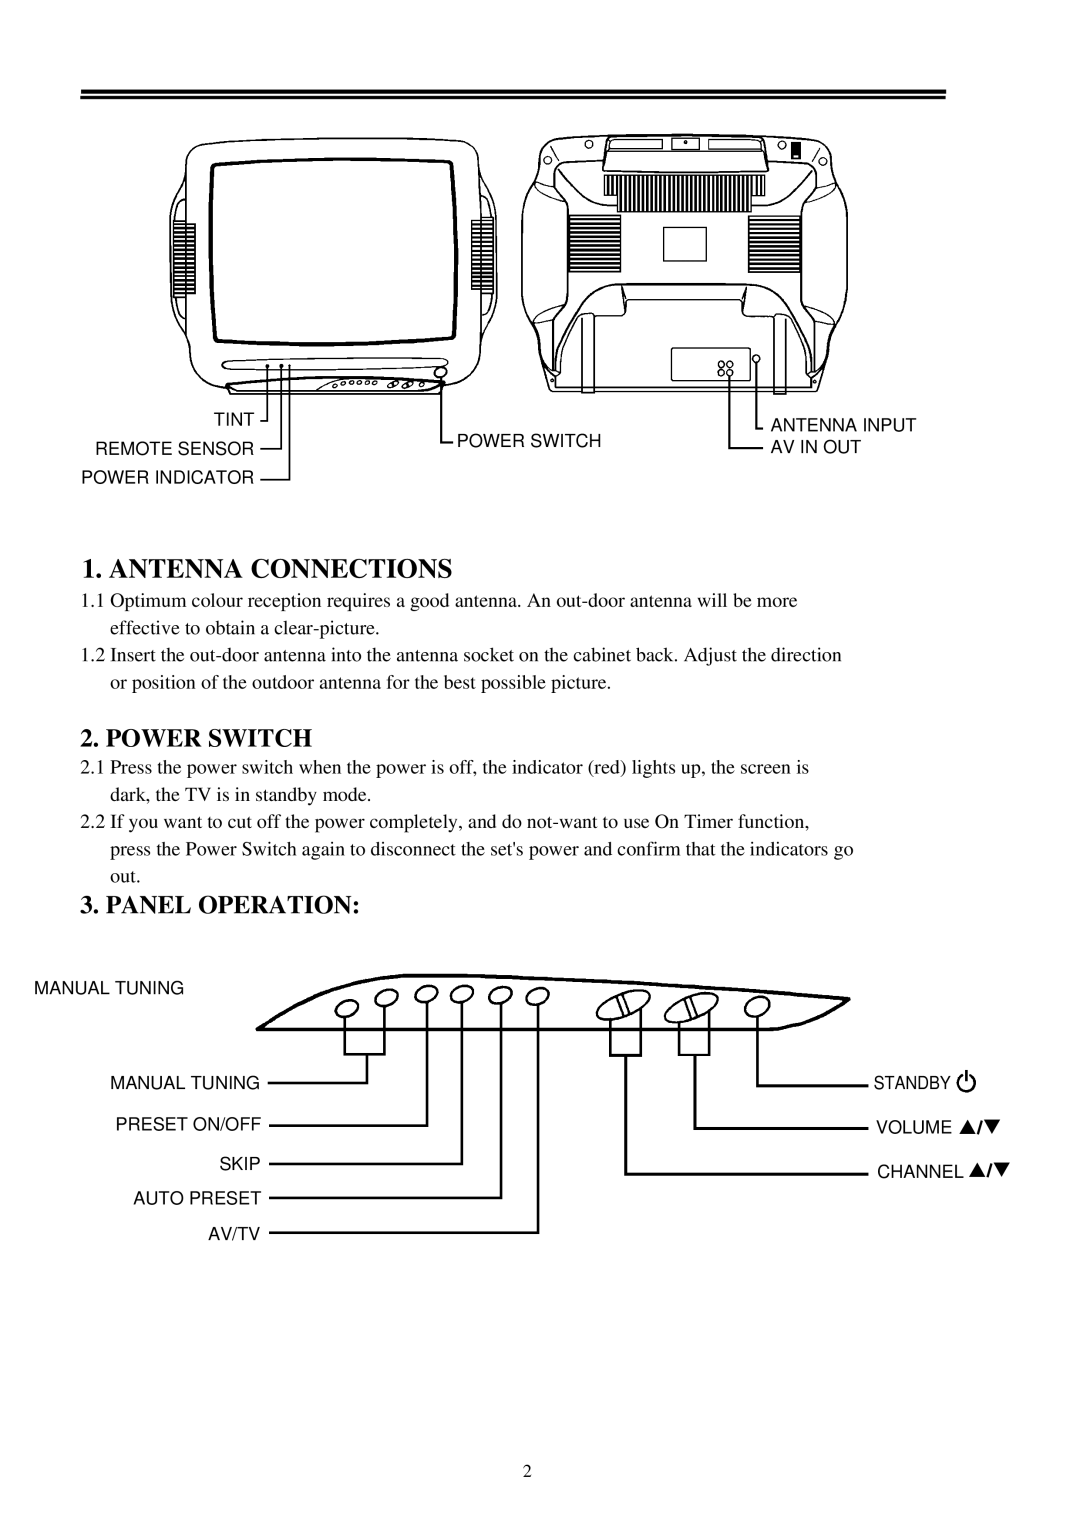 Palsonic 4910 owner manual Antenna Connections, Power Switch, Panel Operation 